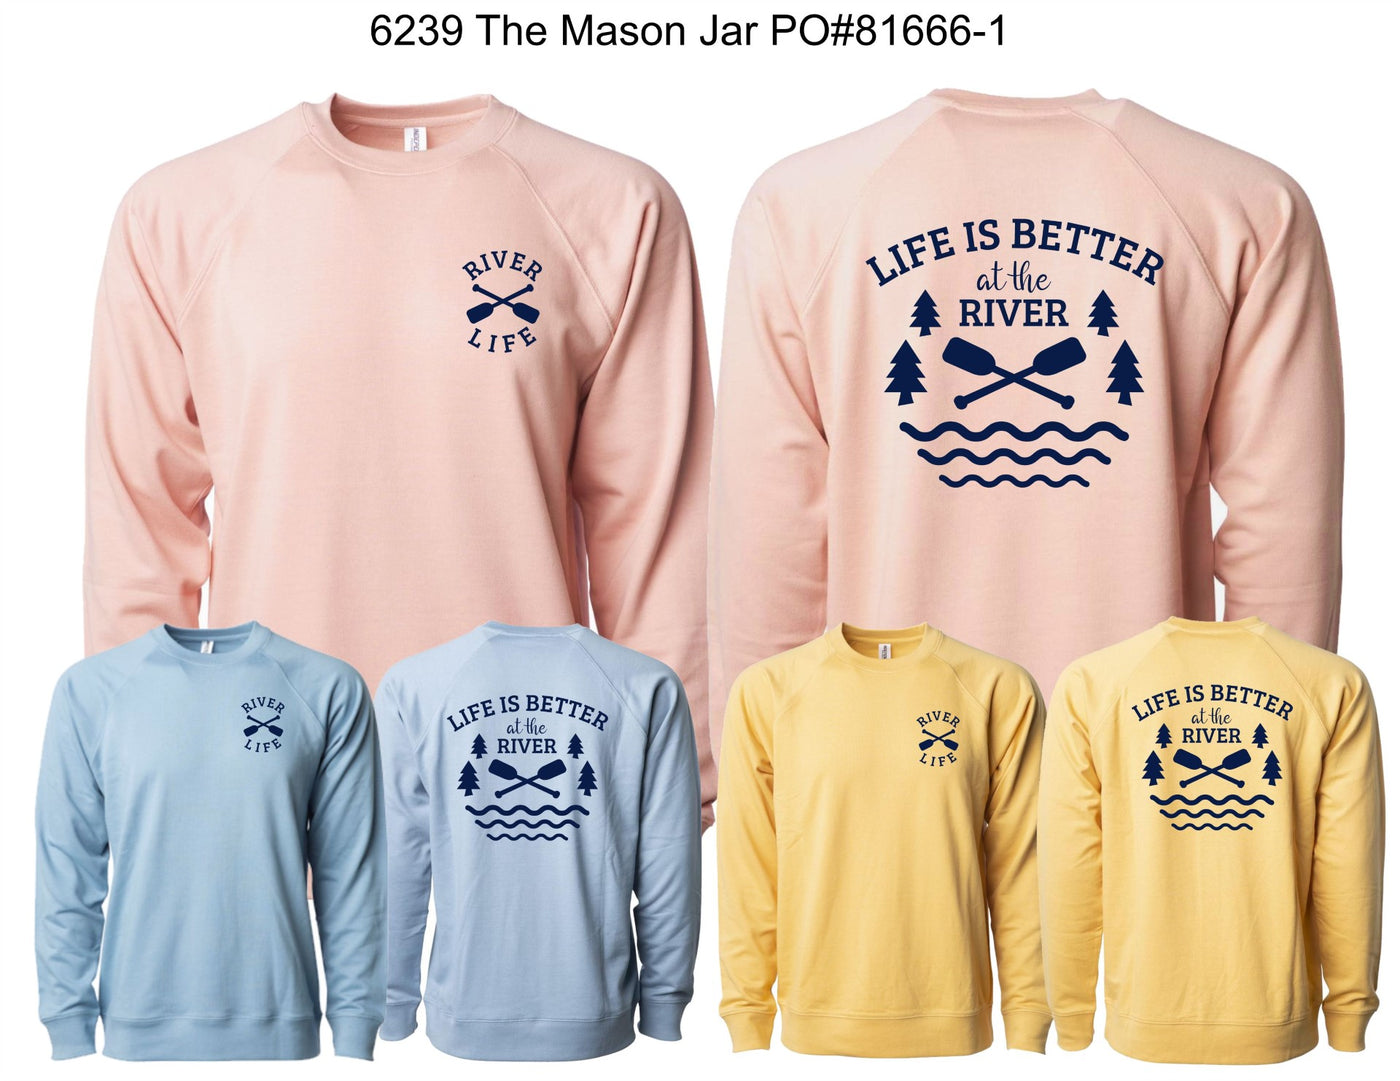 Life is better on the river crewneck